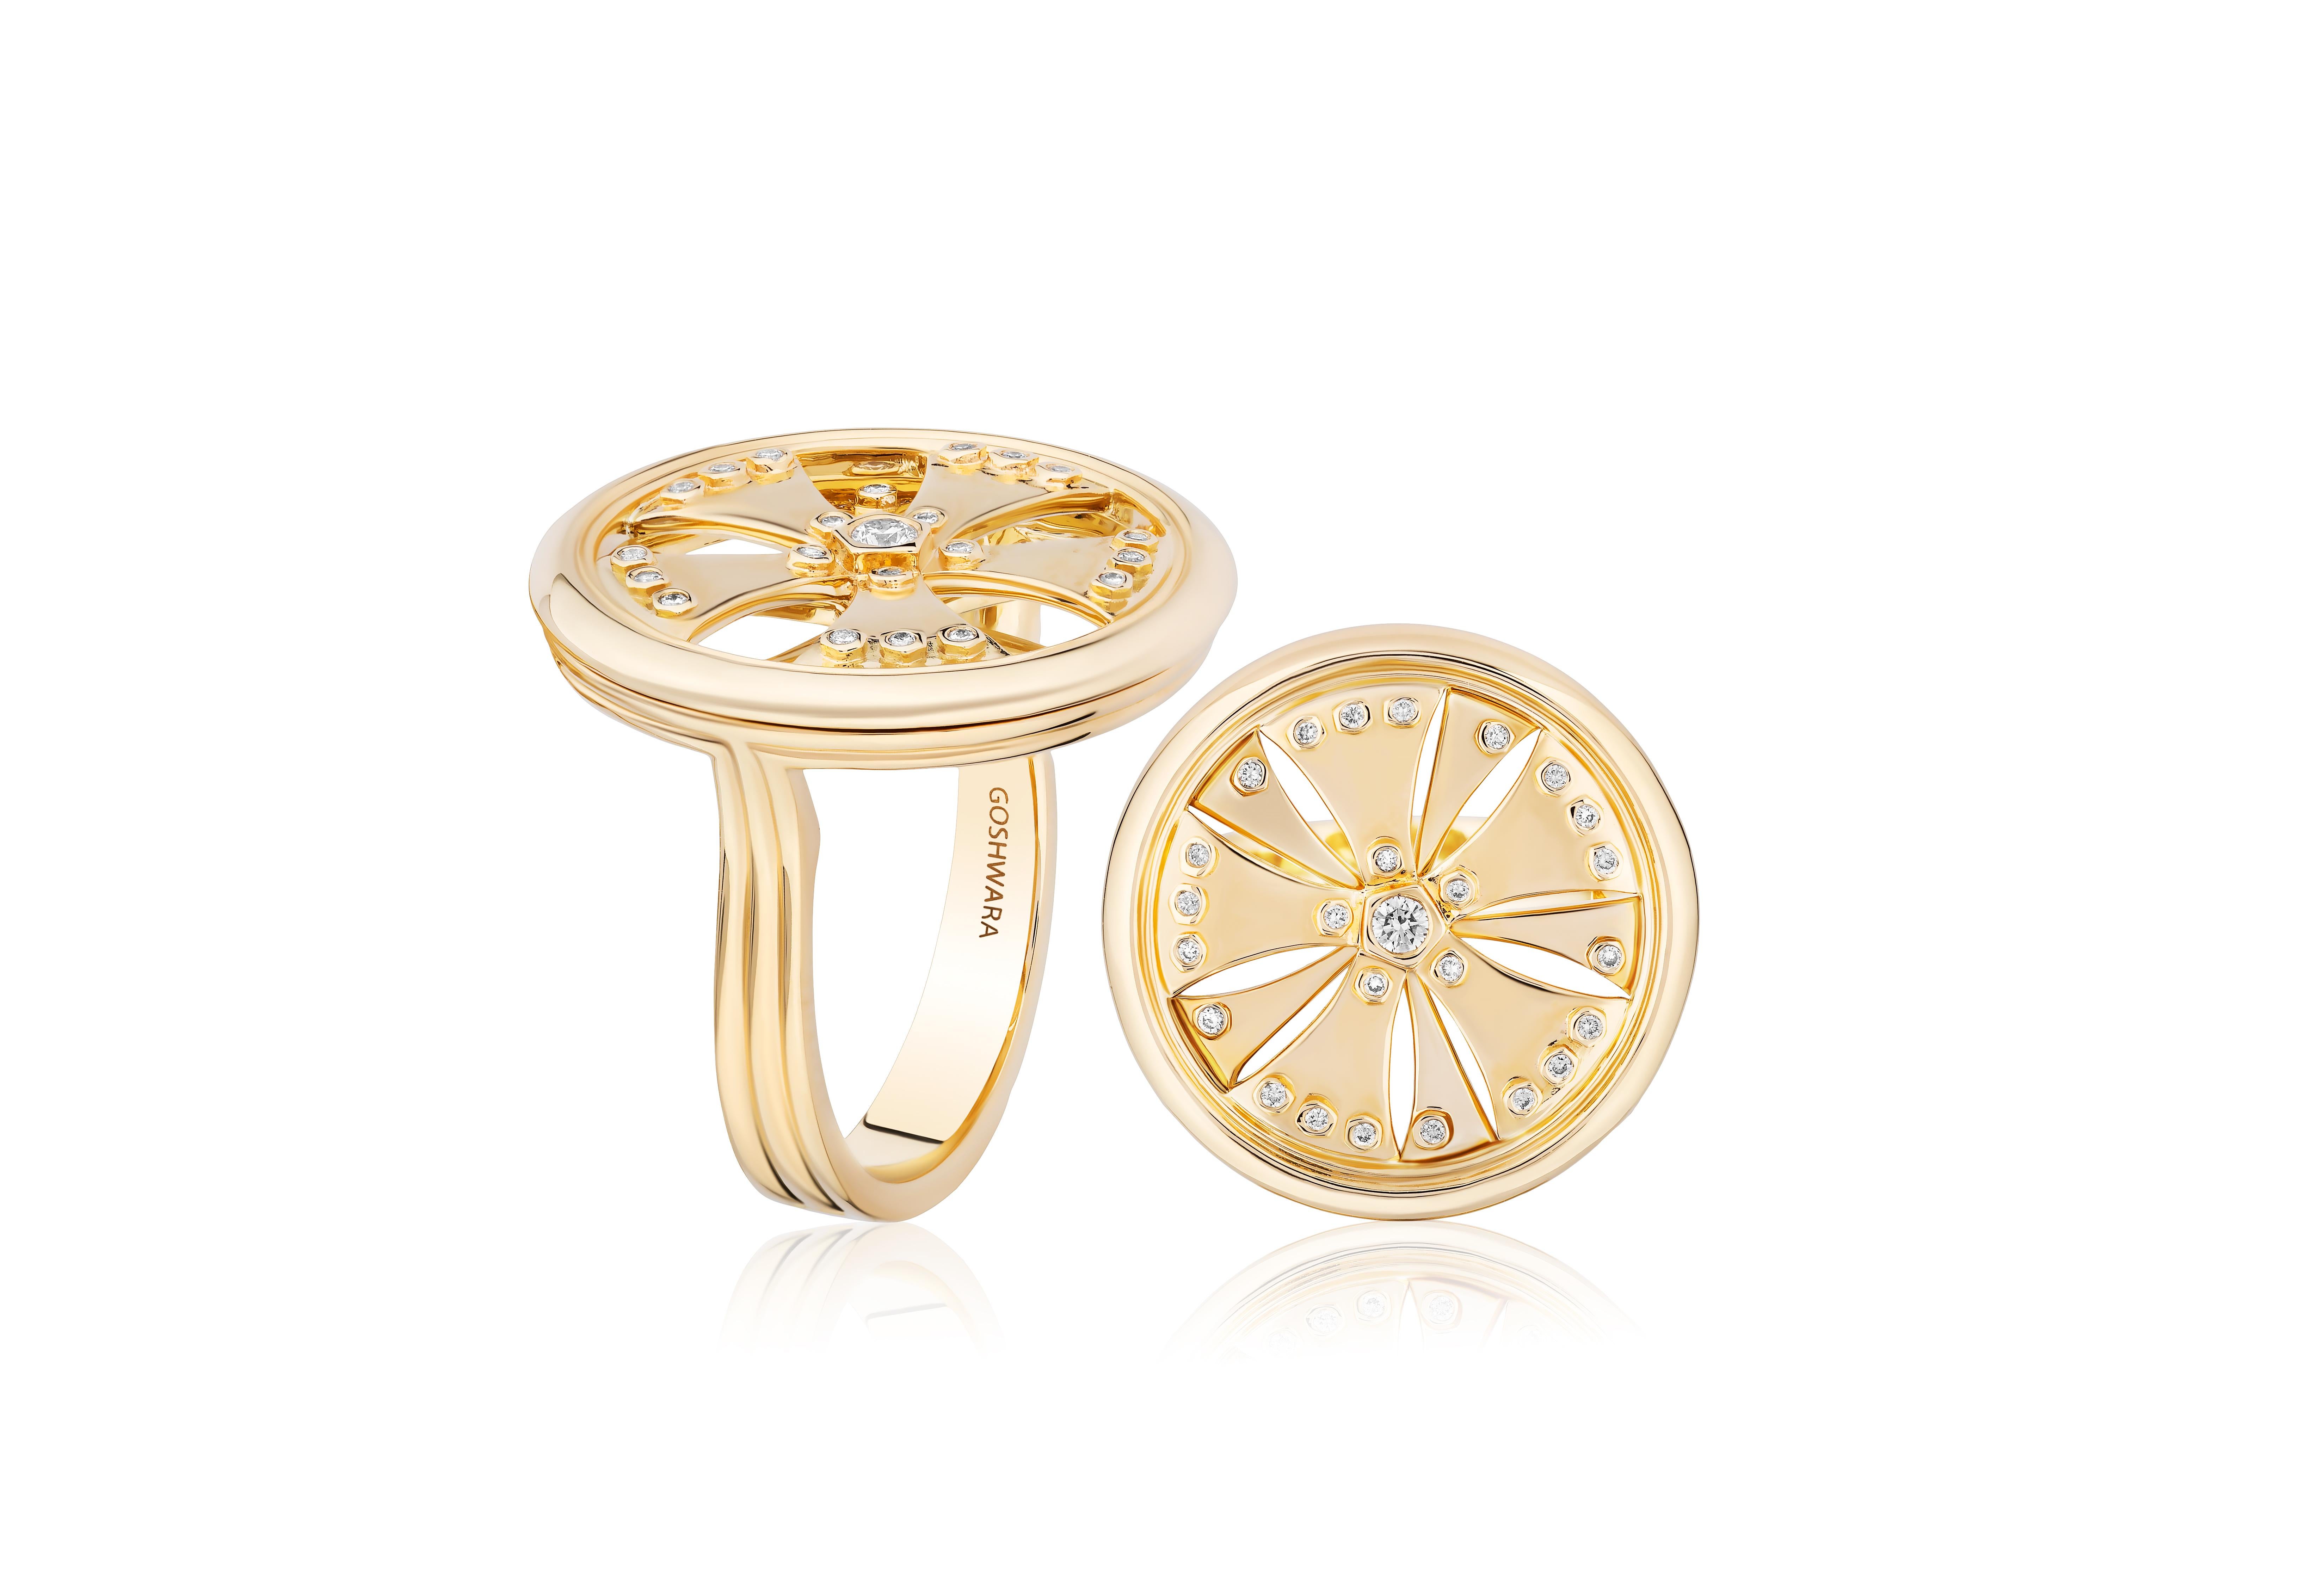 The Diamond & Gold Wheel Ring from the 'G-Classics' Collection is an exquisite piece of jewelry crafted in luxurious 18K yellow gold. This striking ring features a captivating design with a central wheel motif adorned with dazzling diamonds,